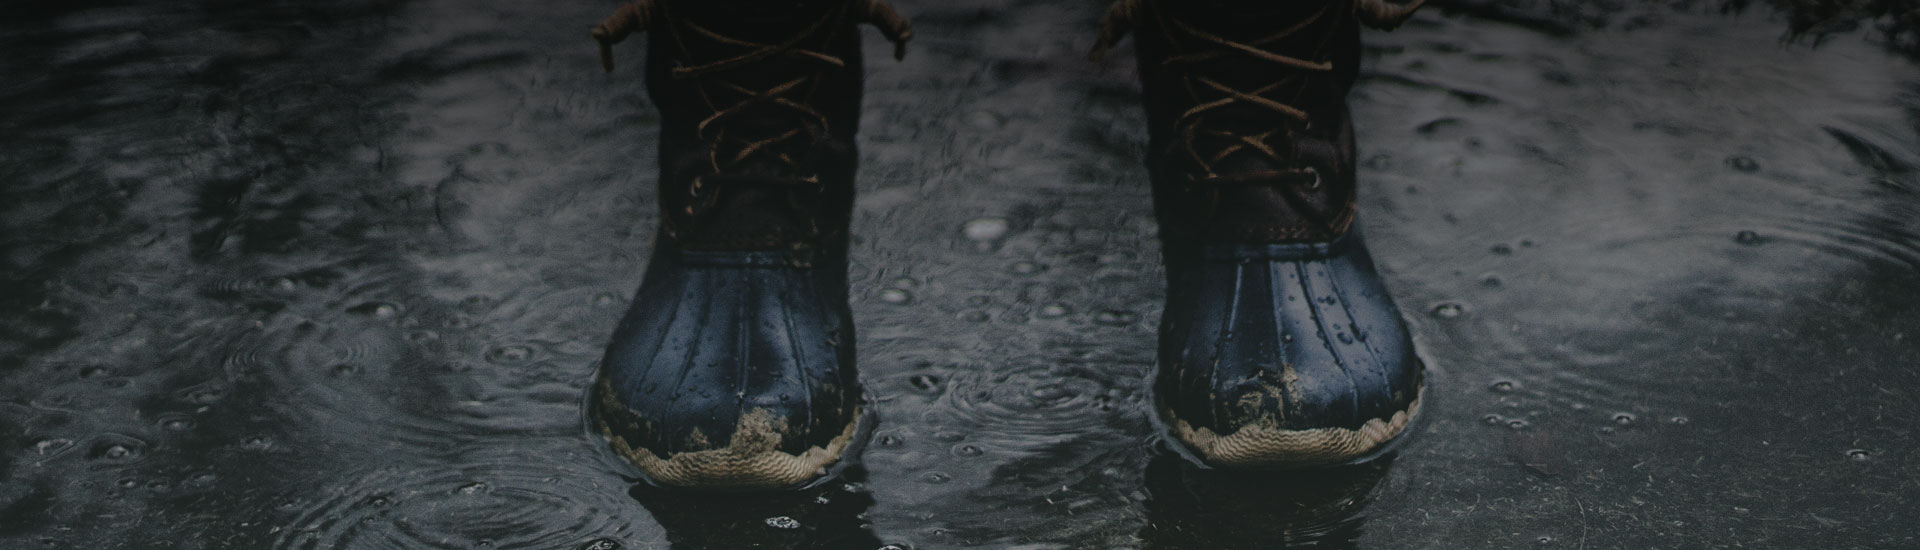 Decorative image of a photo of a pair of boots in a large puddle of water